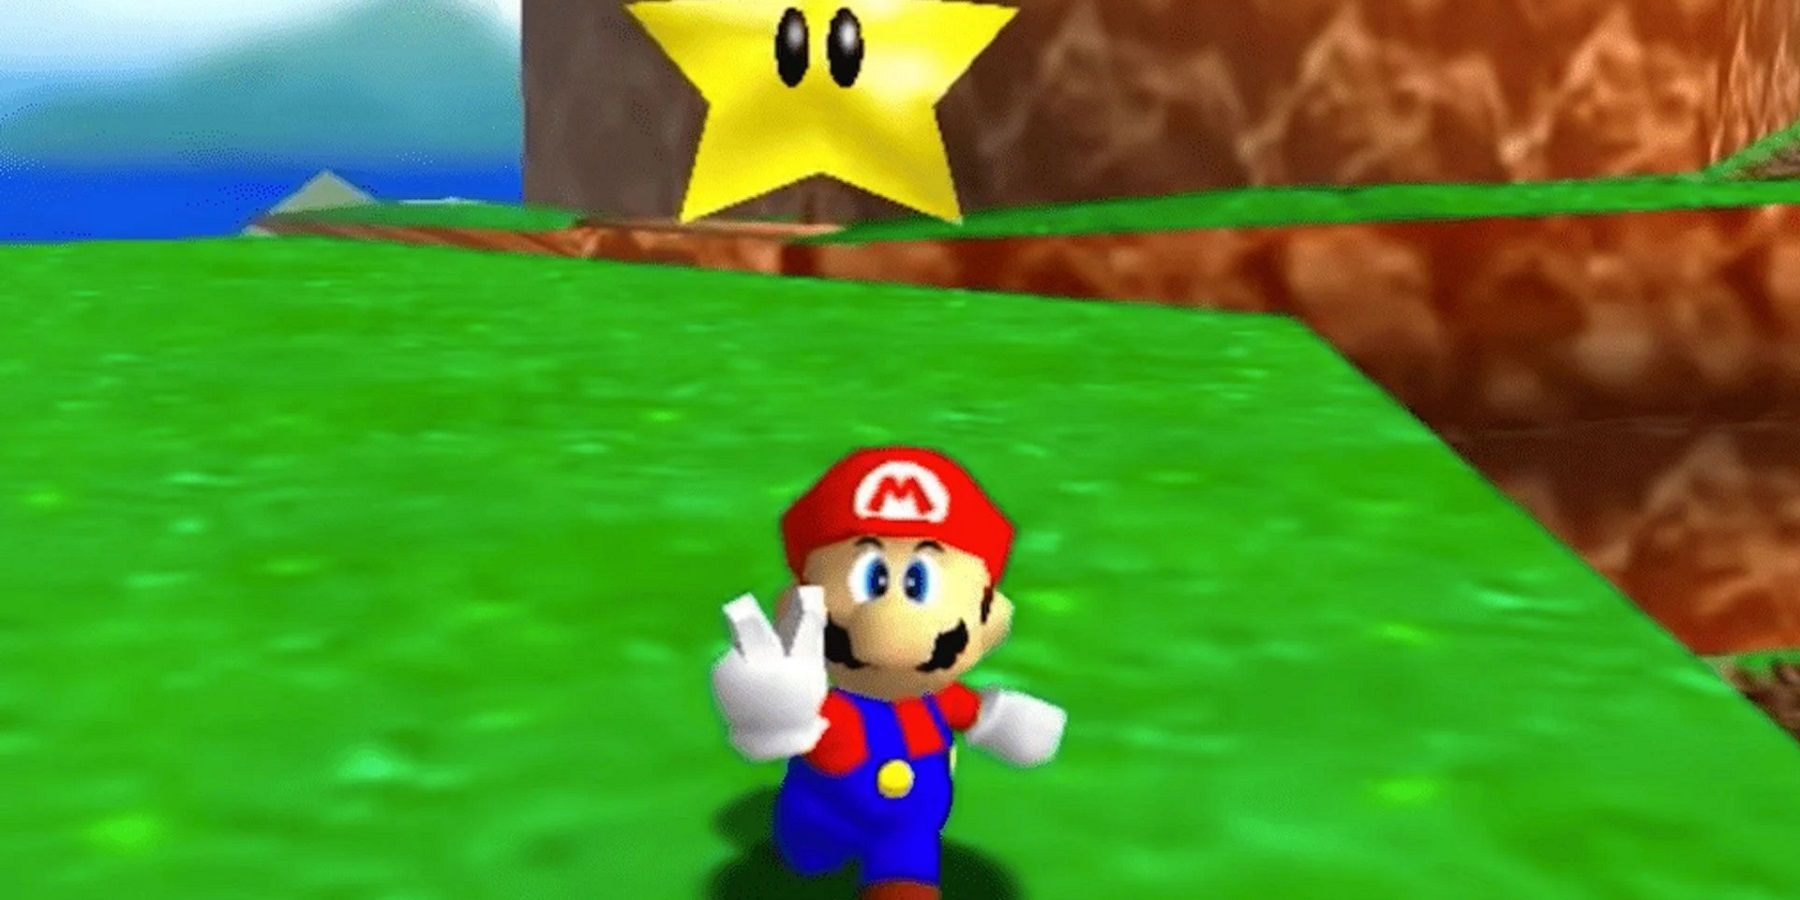 Screenshot from Mario 64 showing the titular Mario with a star above his head.